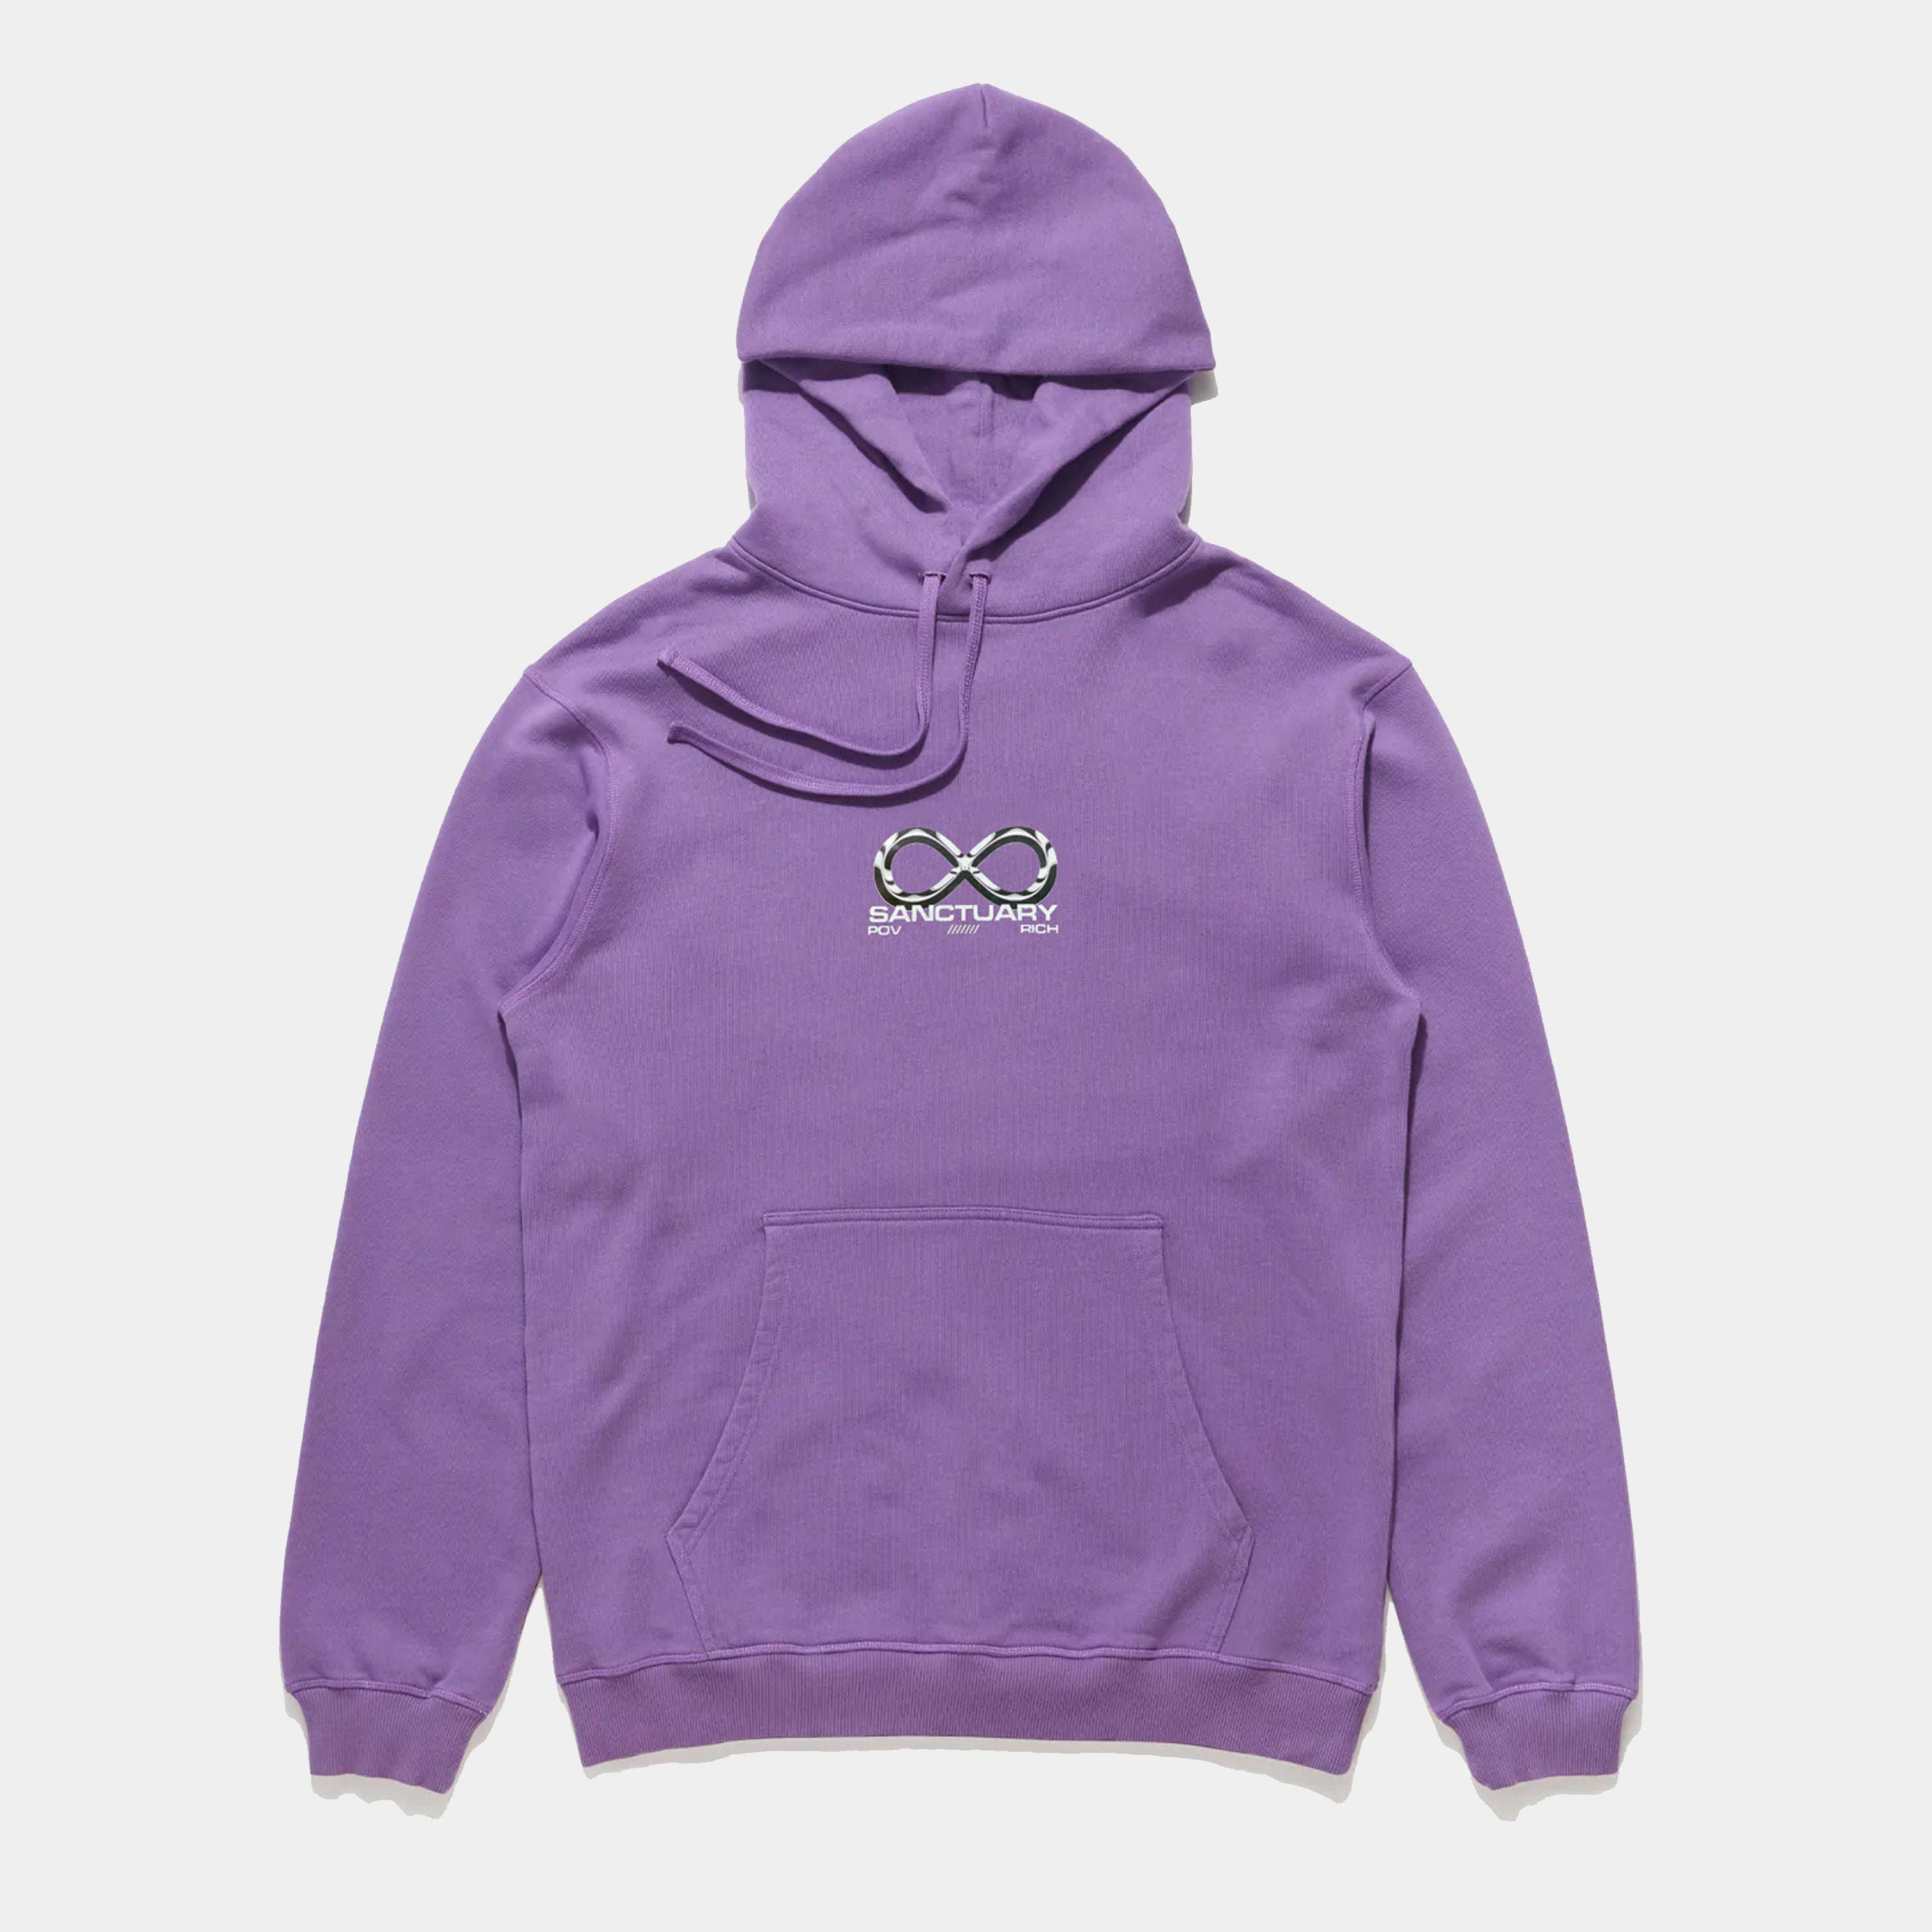 Purple hoodie with a sleek design, perfect for streetwear and everyday wear. Made from high-quality materials for maximum comfort and durability.